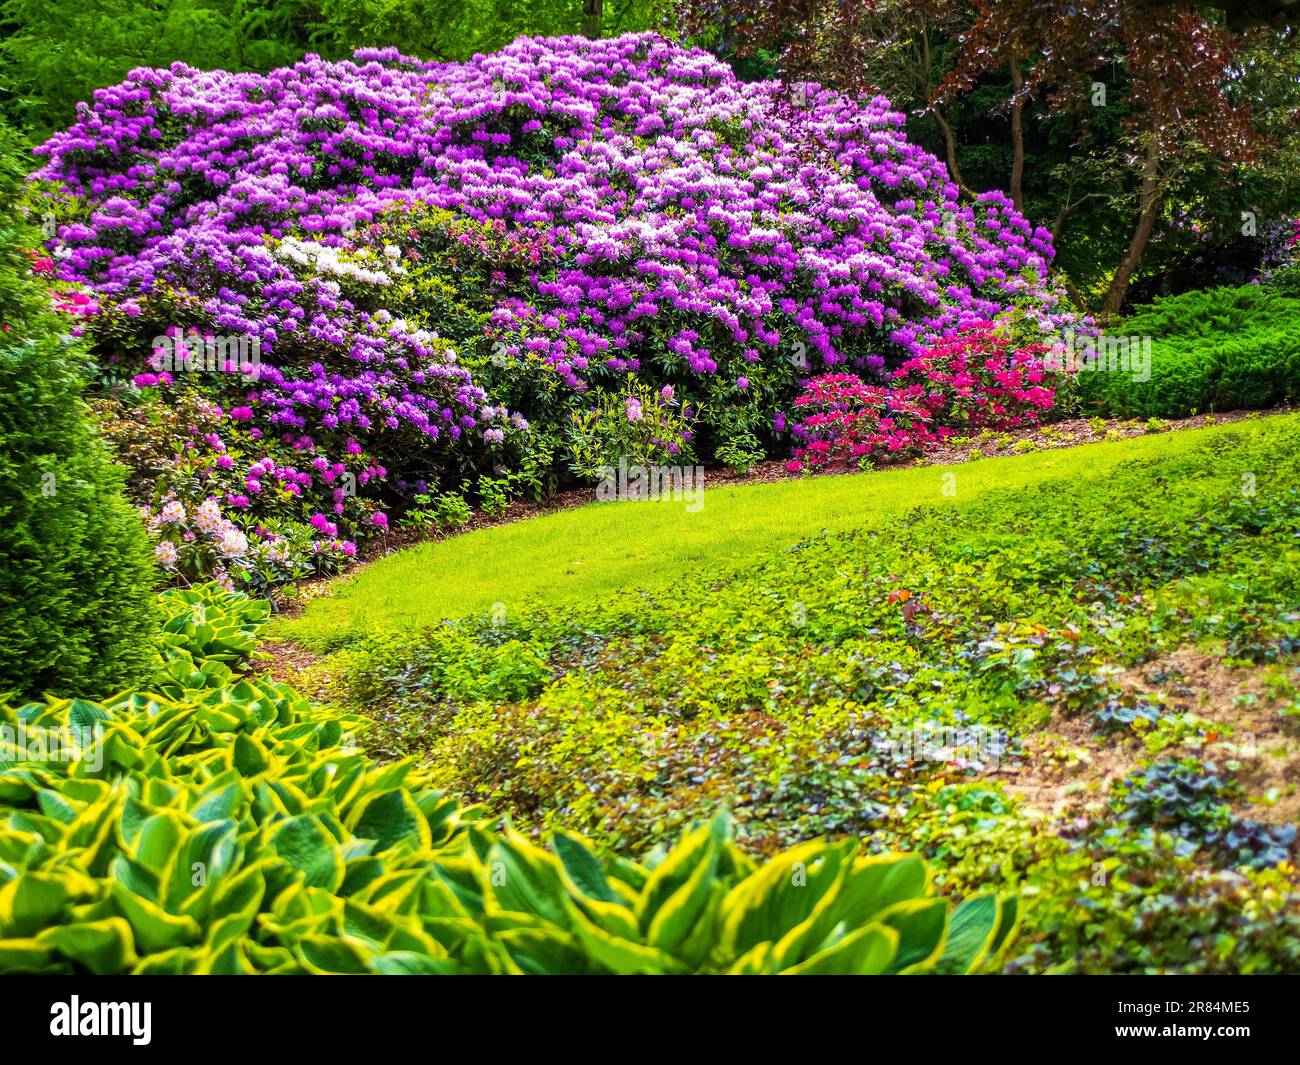 spring season meadow with blooming rhododendron shrubs Stock Photo